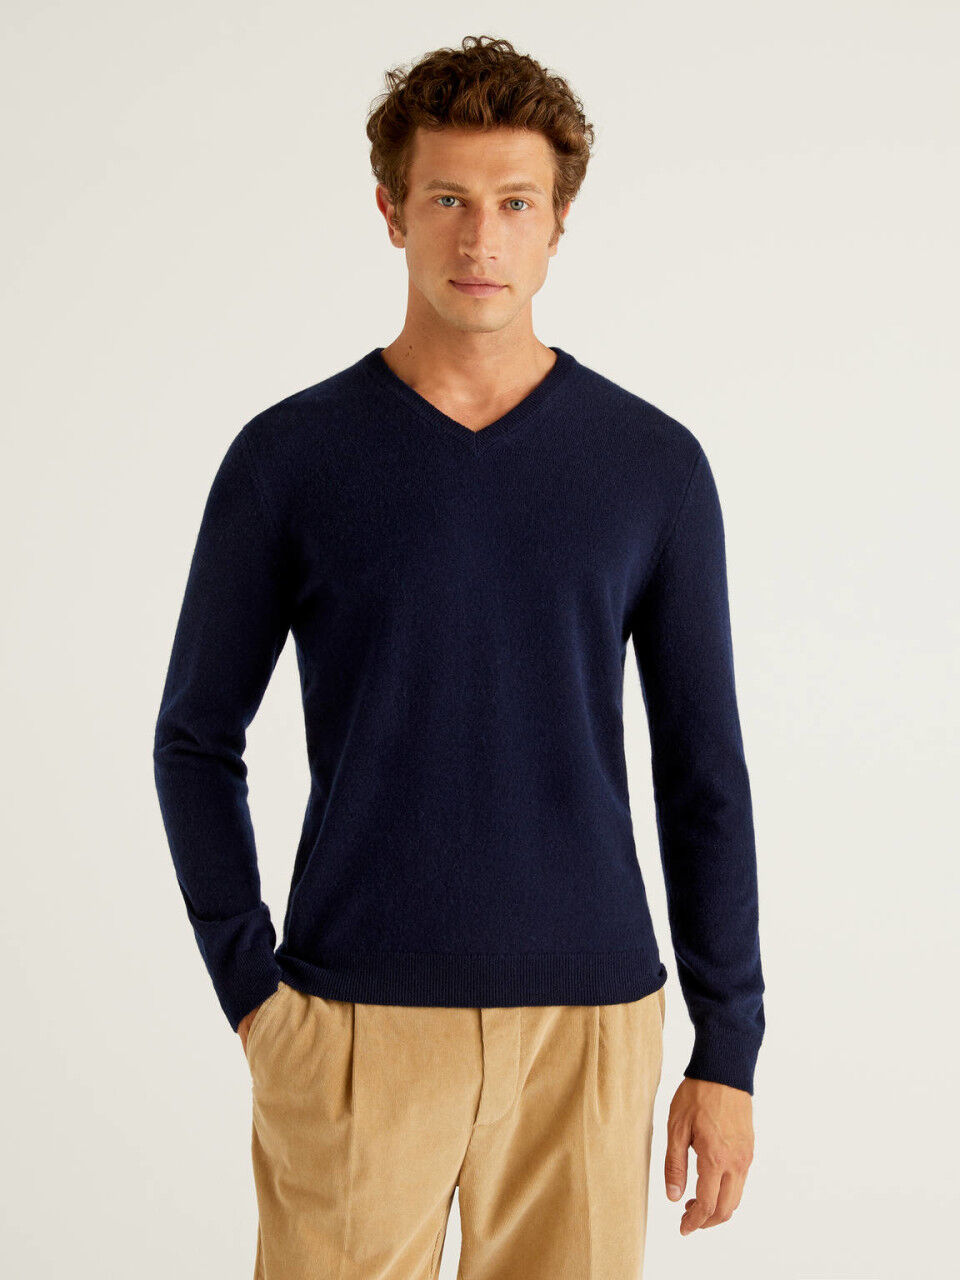 Men's V-Neck Sweaters New Collection 2021 |